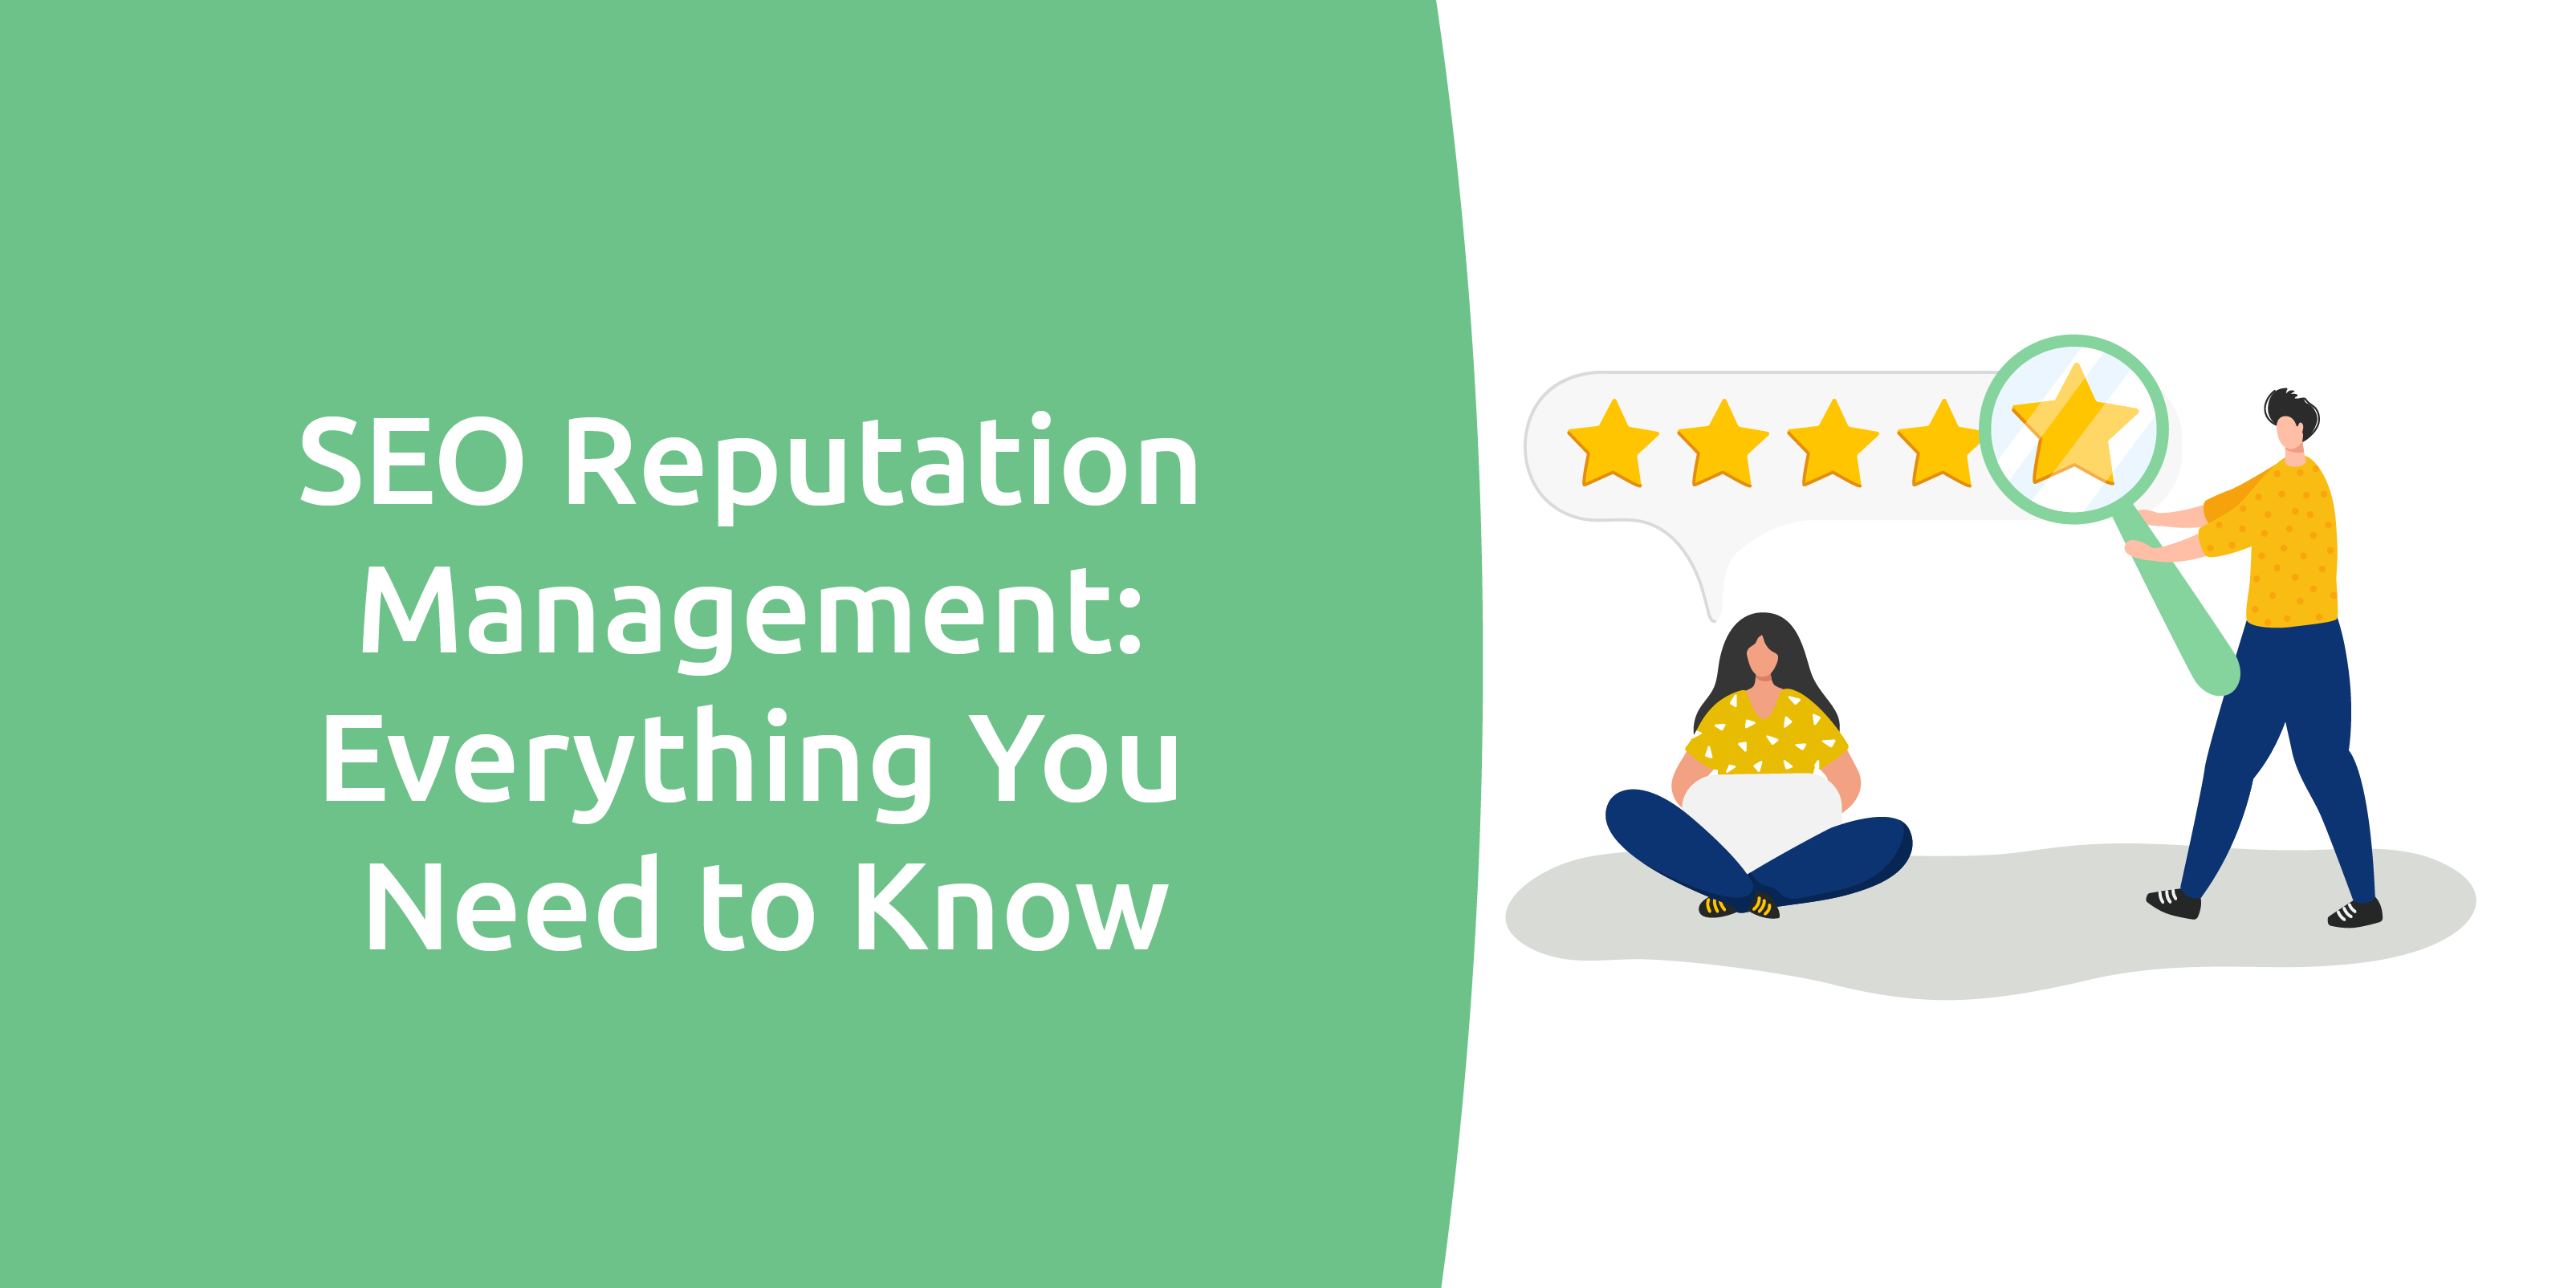 SEO Reputation Management: Everything You Need to Know